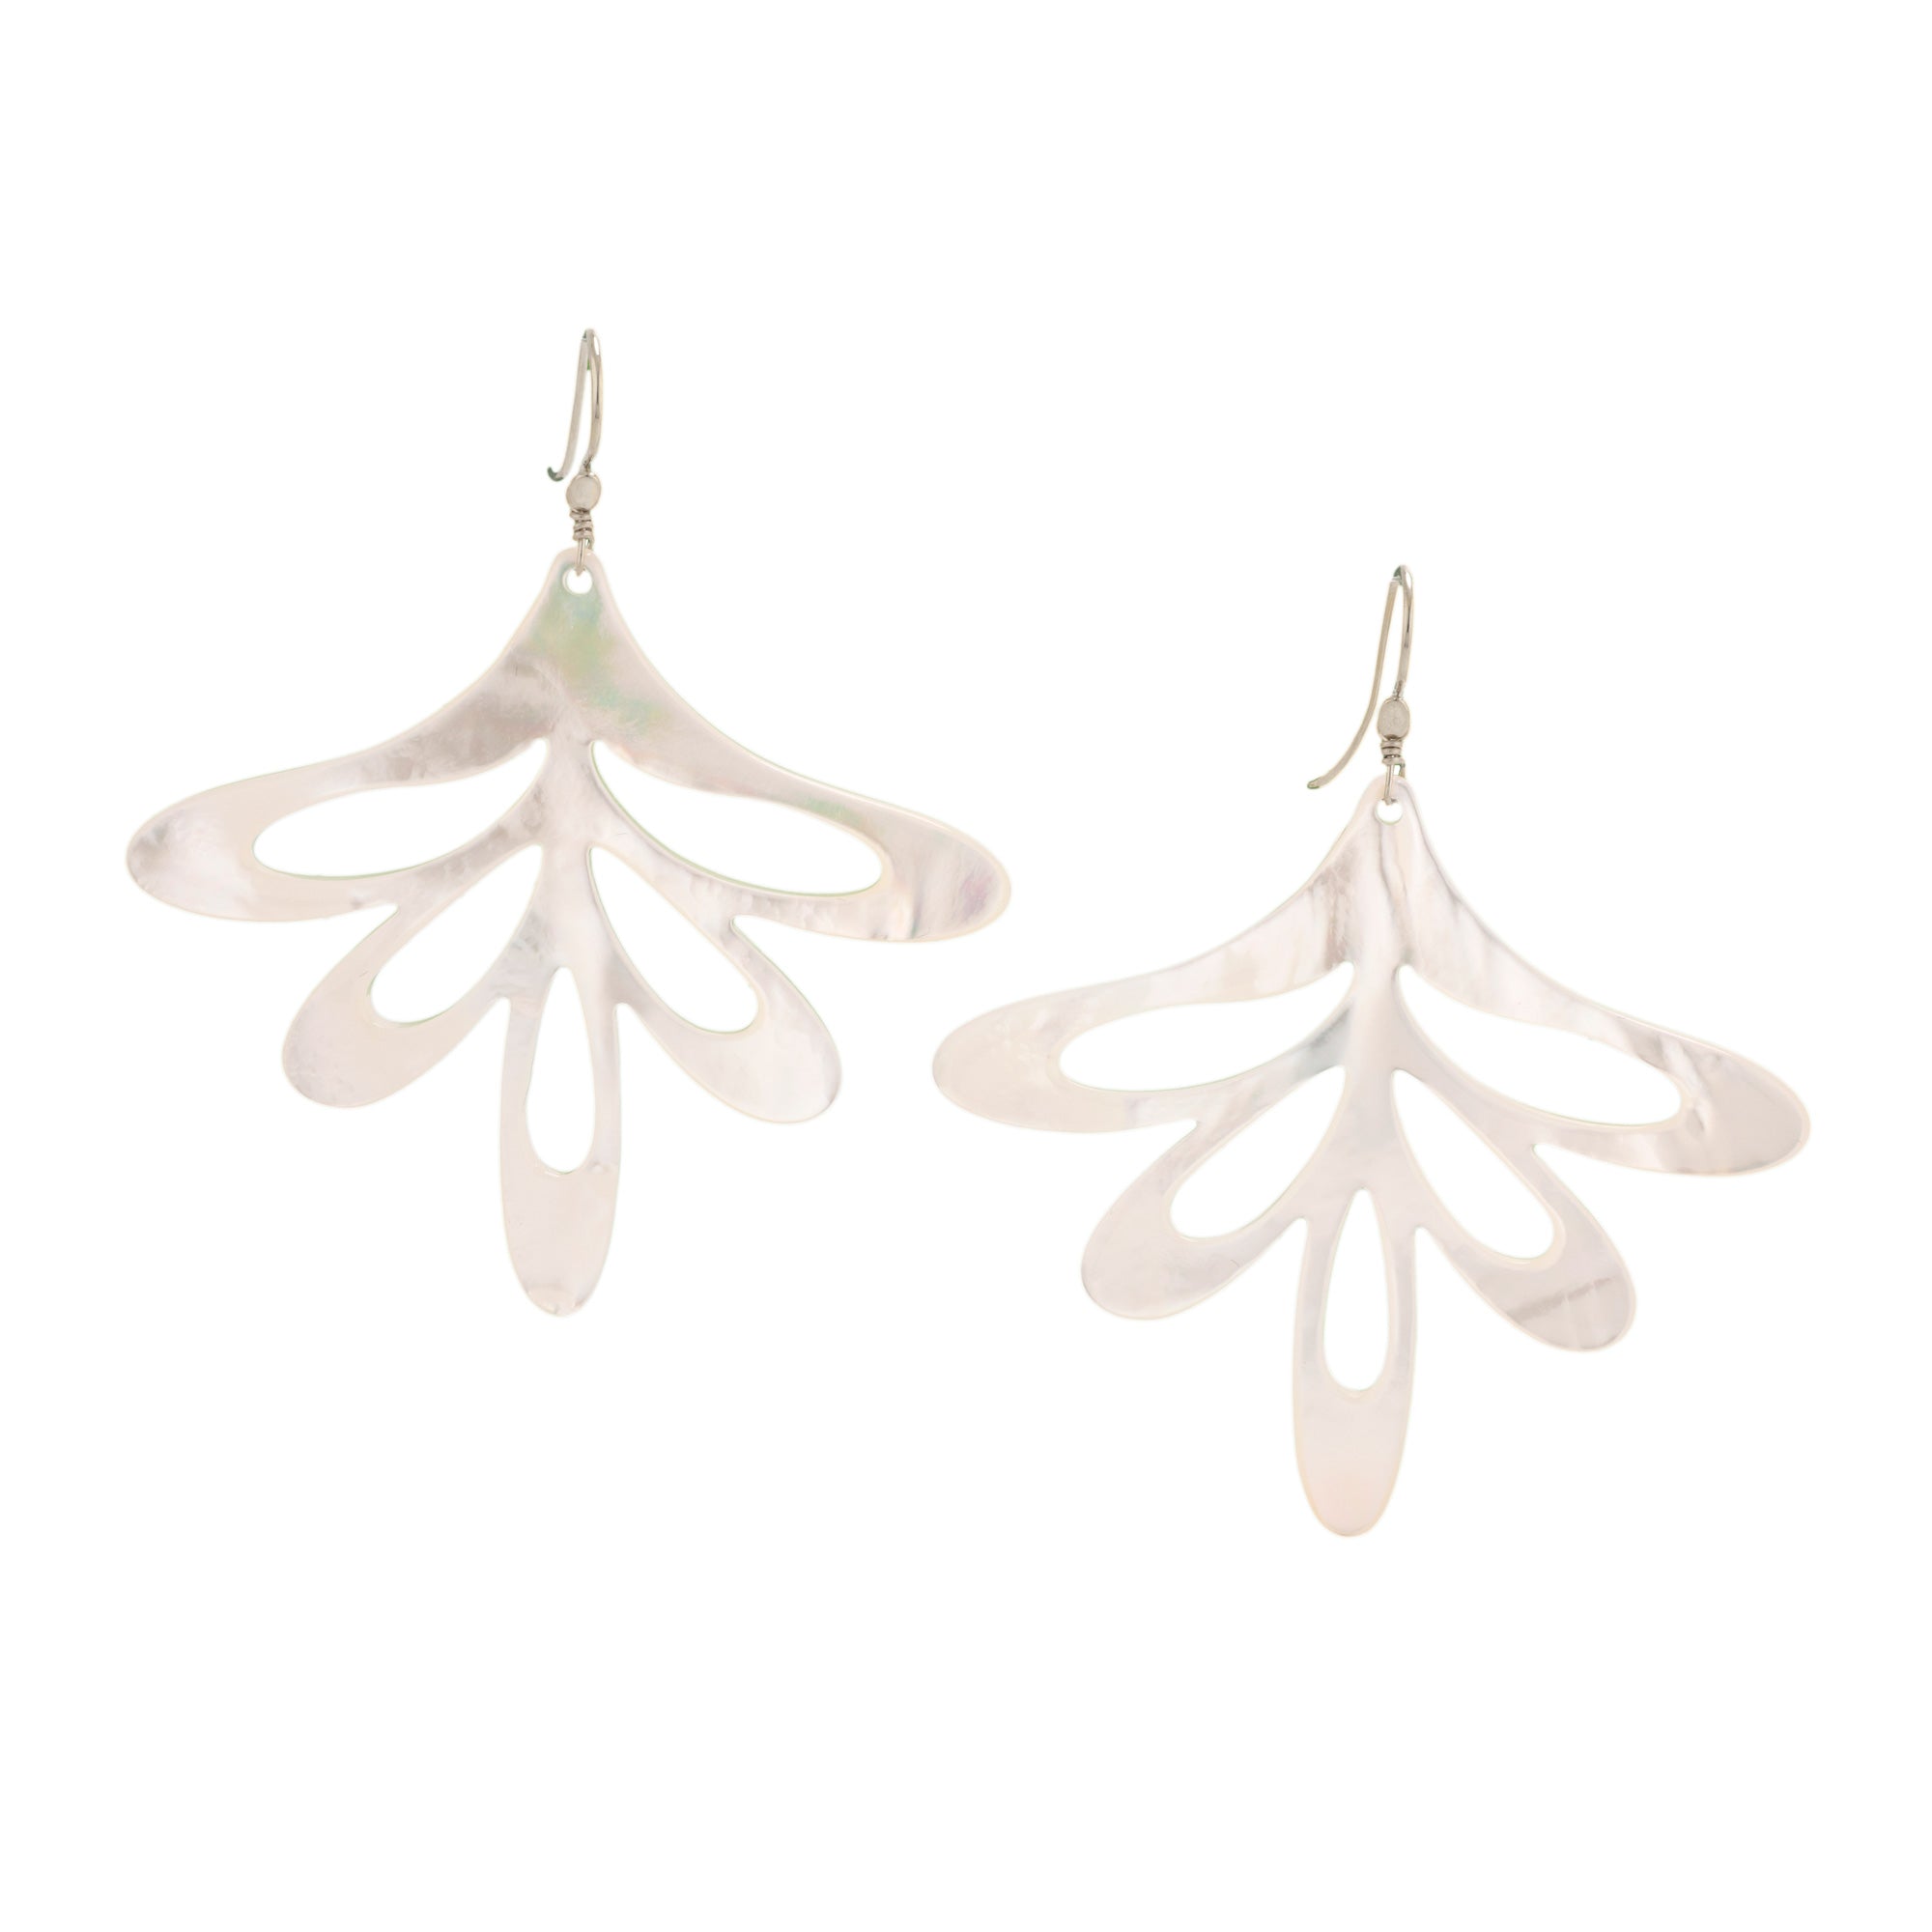 Dragonfly i mother of pearl earrings